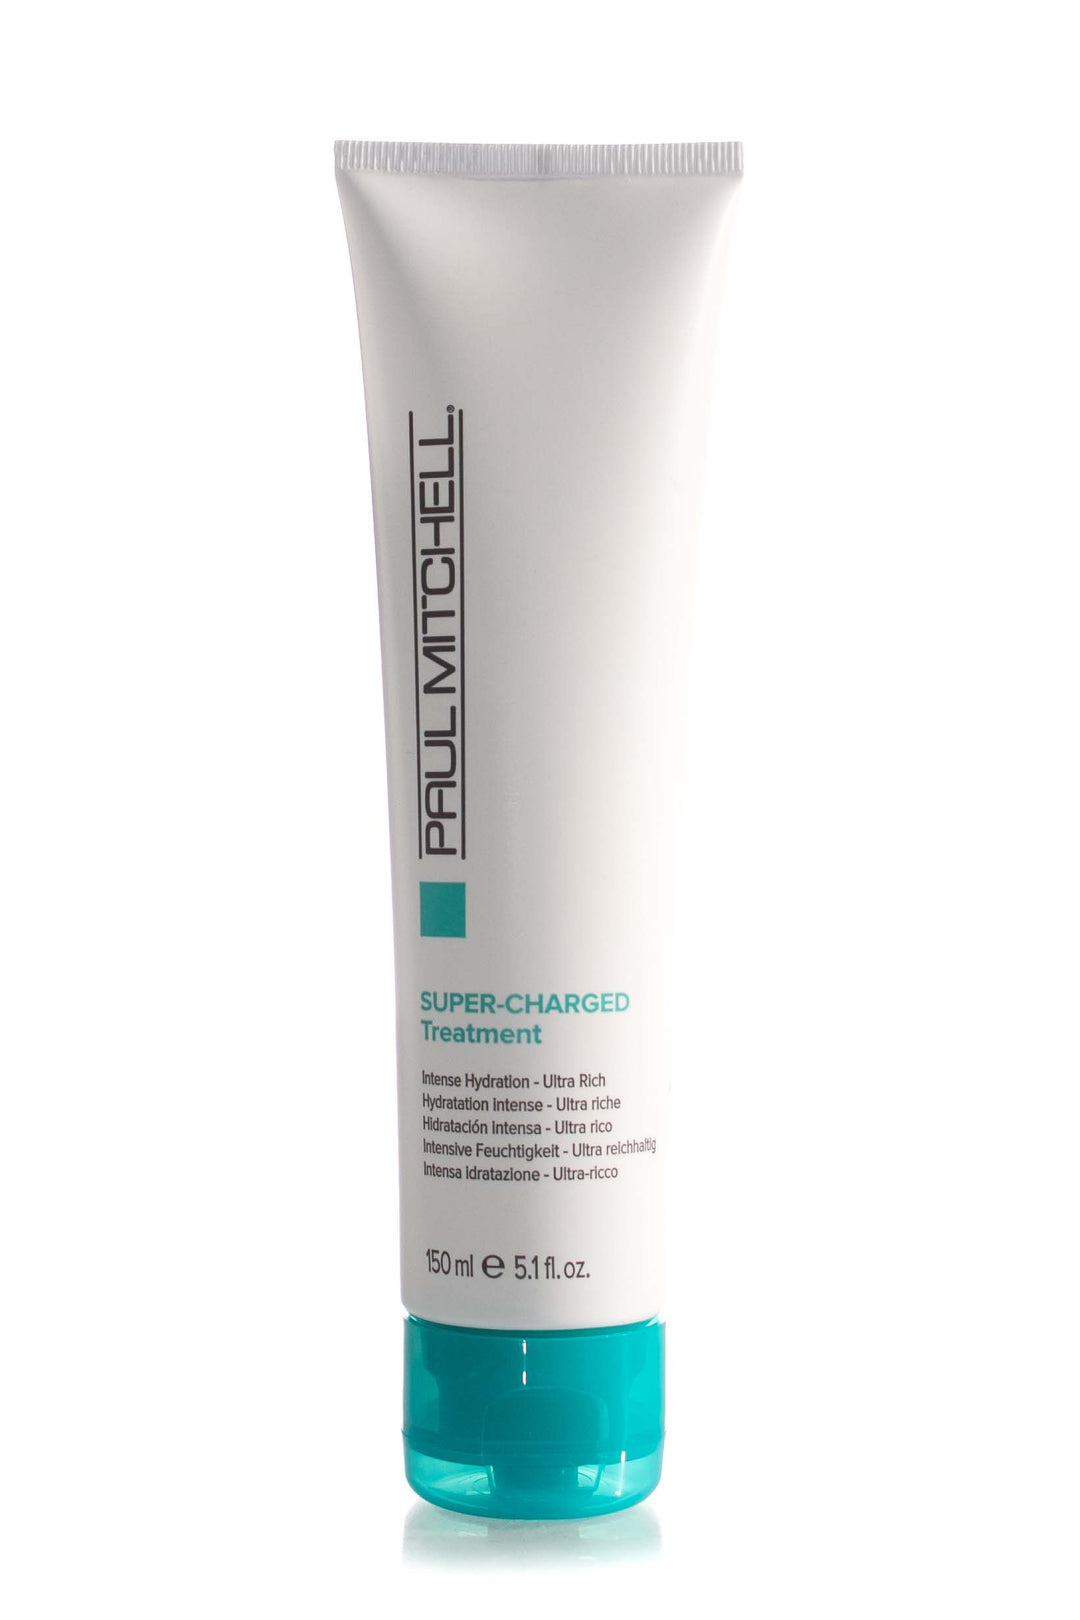 paul-mitchell-super-charged-treatment-150ml